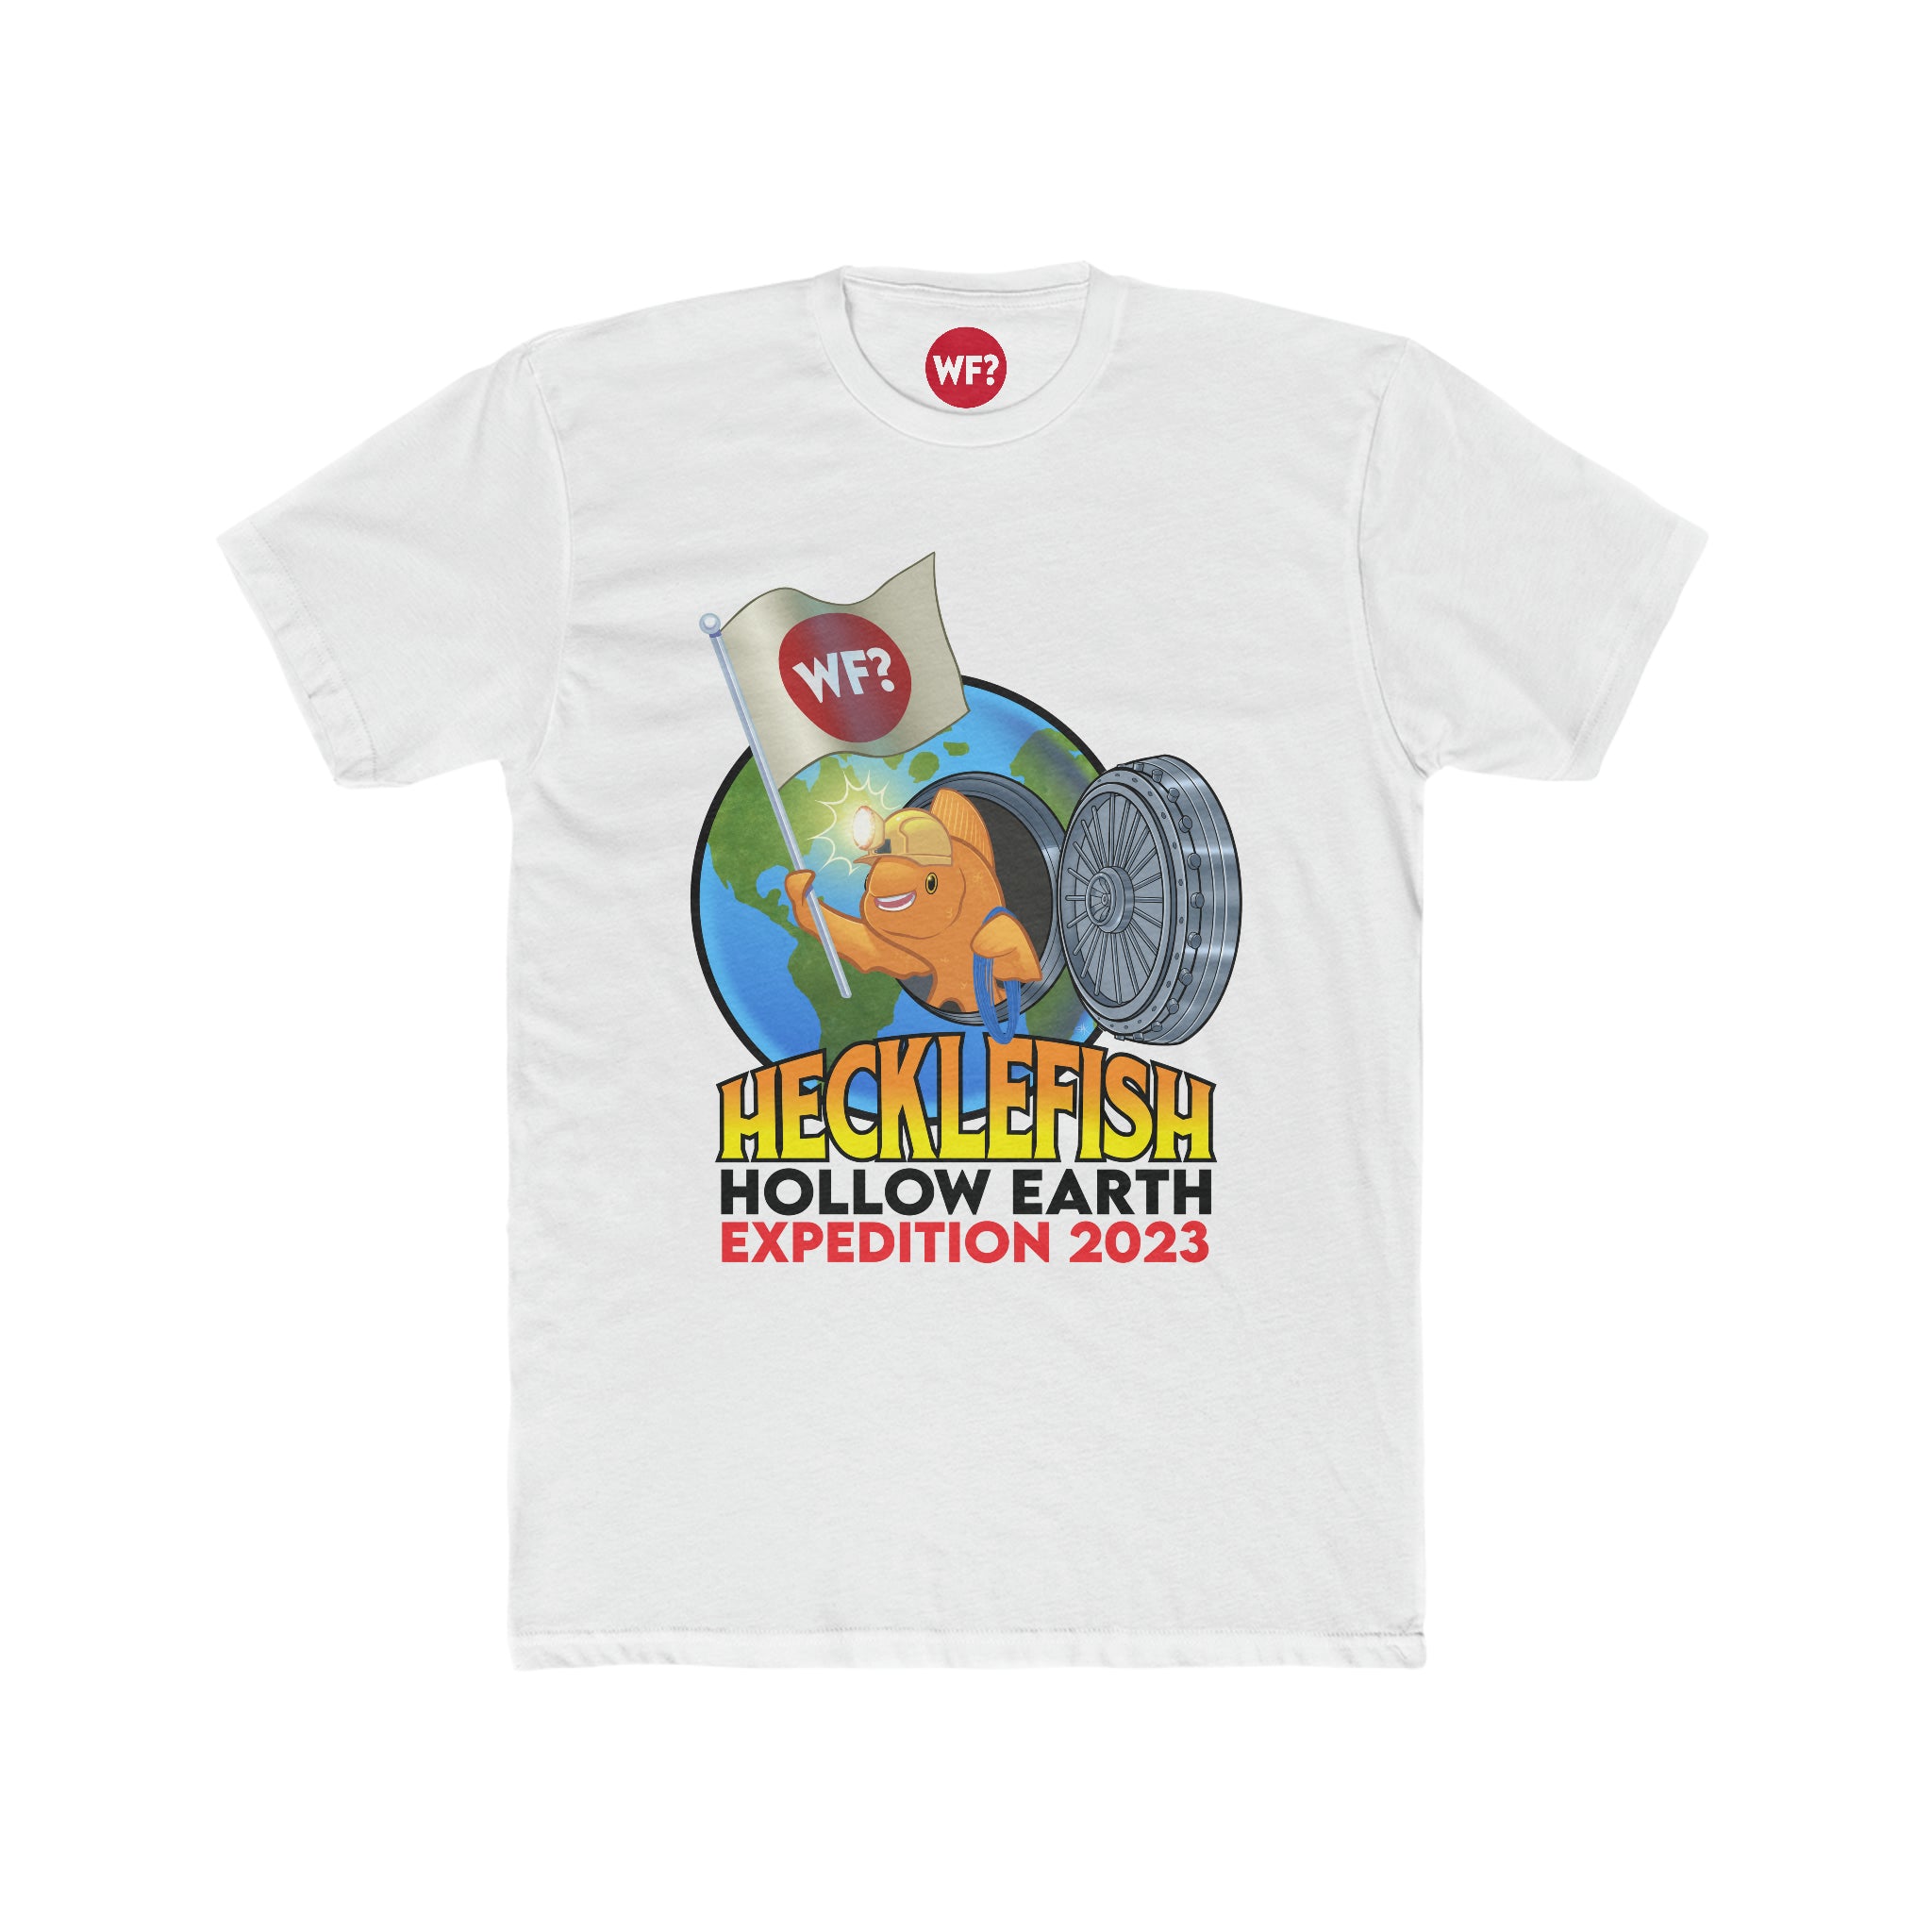 Buy solid-white Hollow Earth Limited T-Shirt